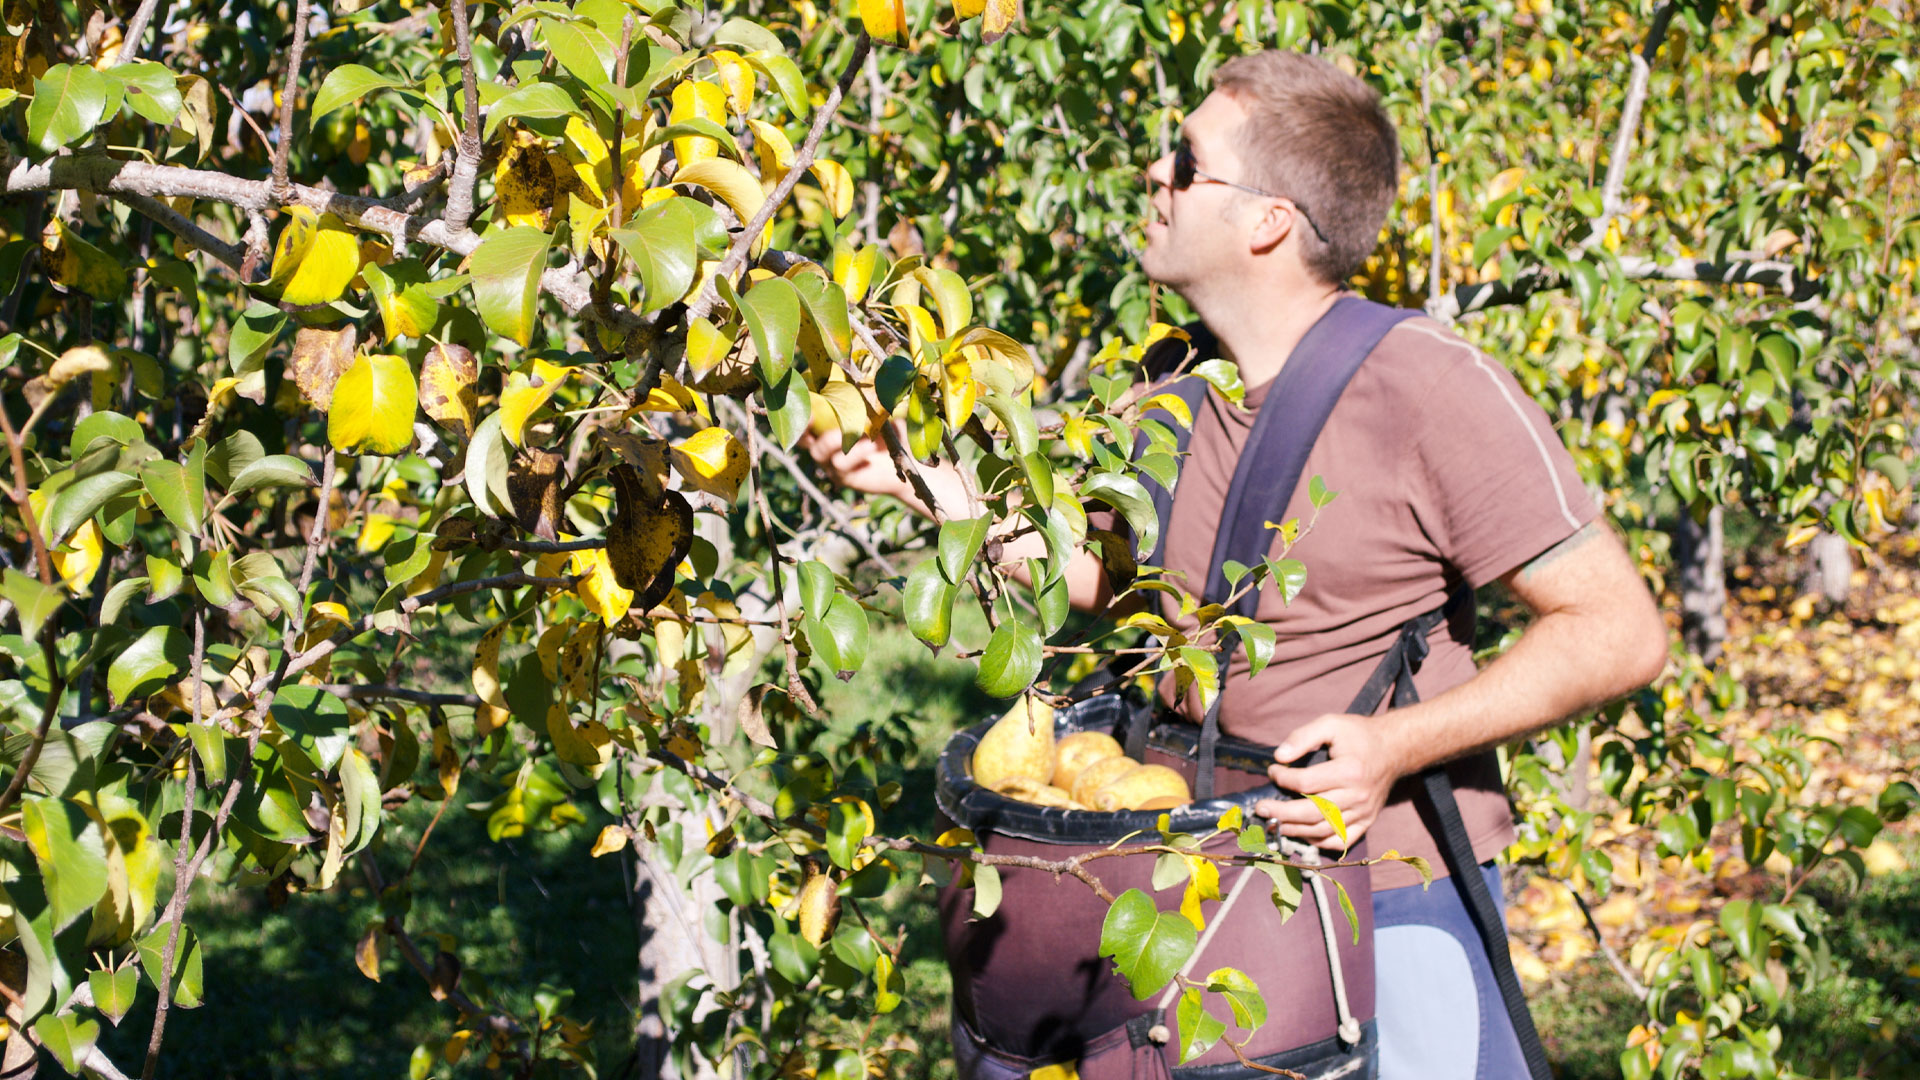 Young man working picking fruit in a seasonal job in New Zealand.